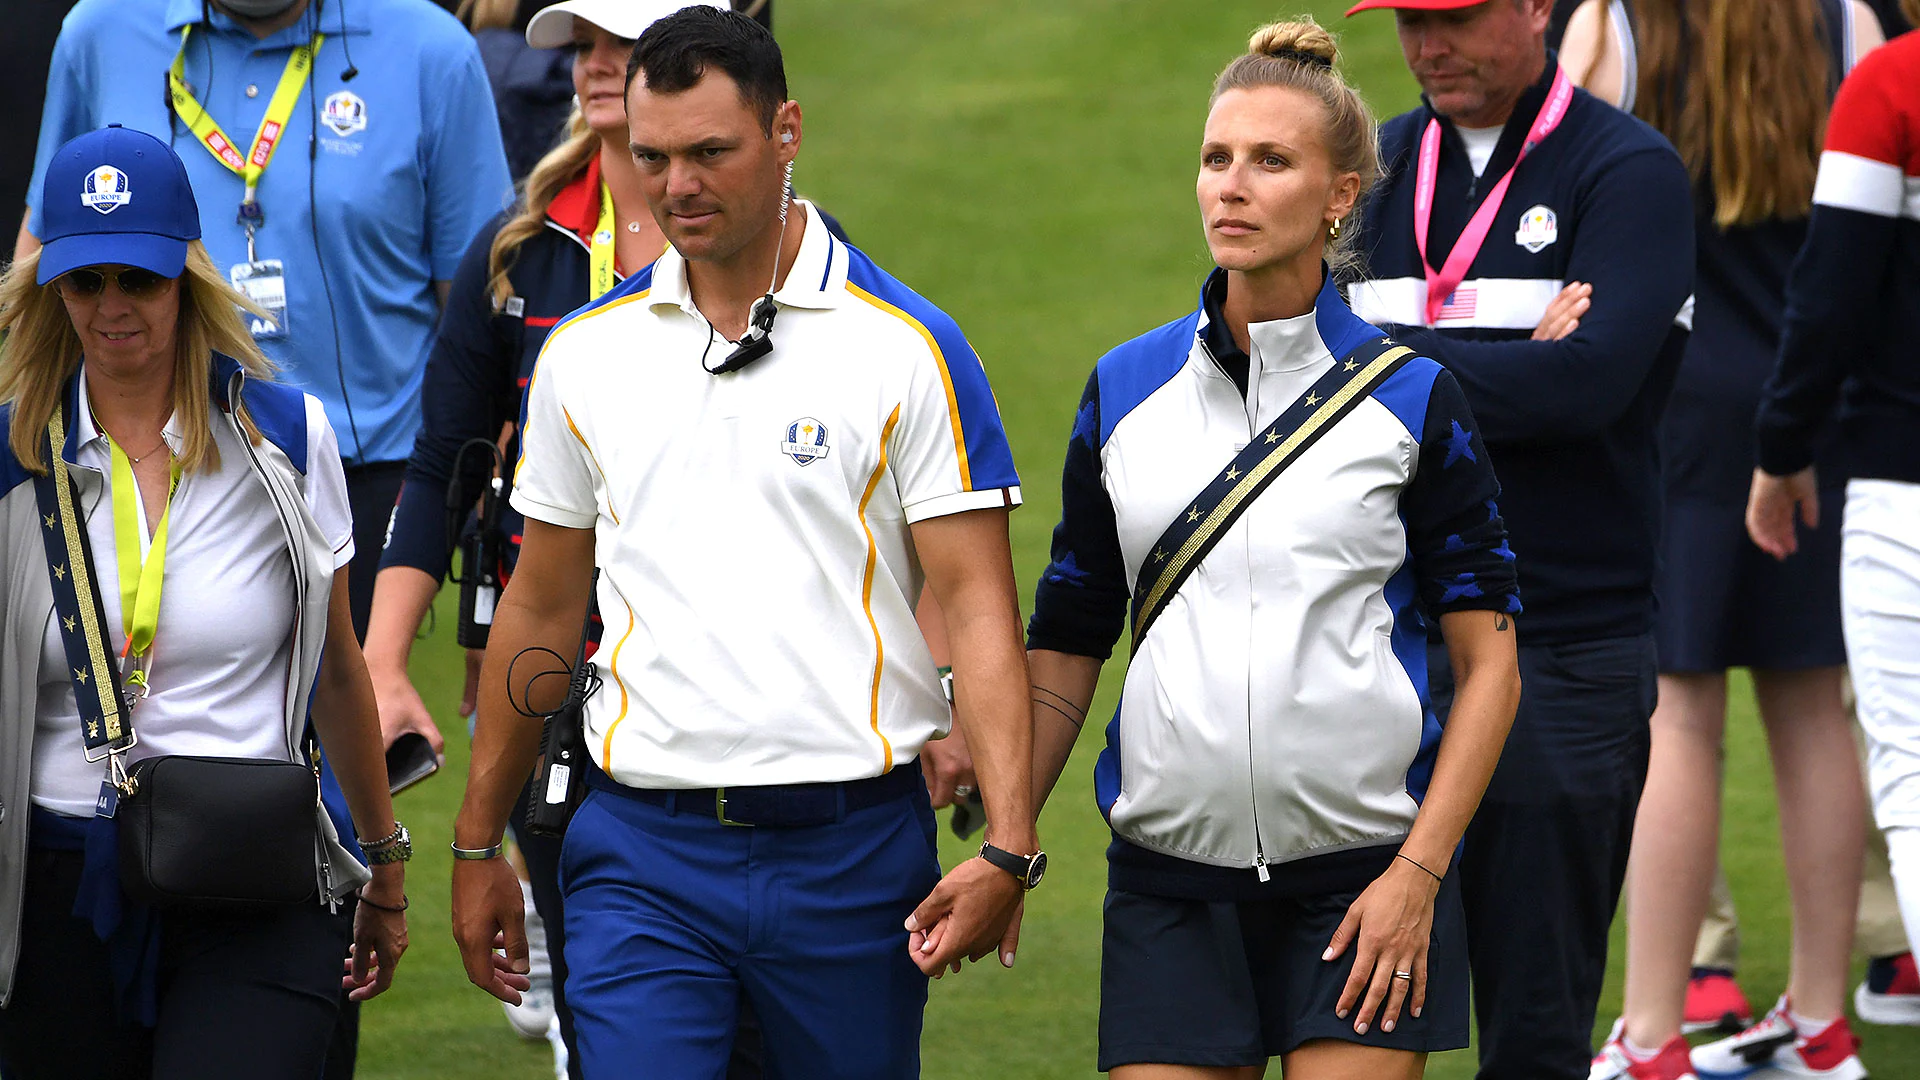 Martin Kaymer to take off three months for birth of first child